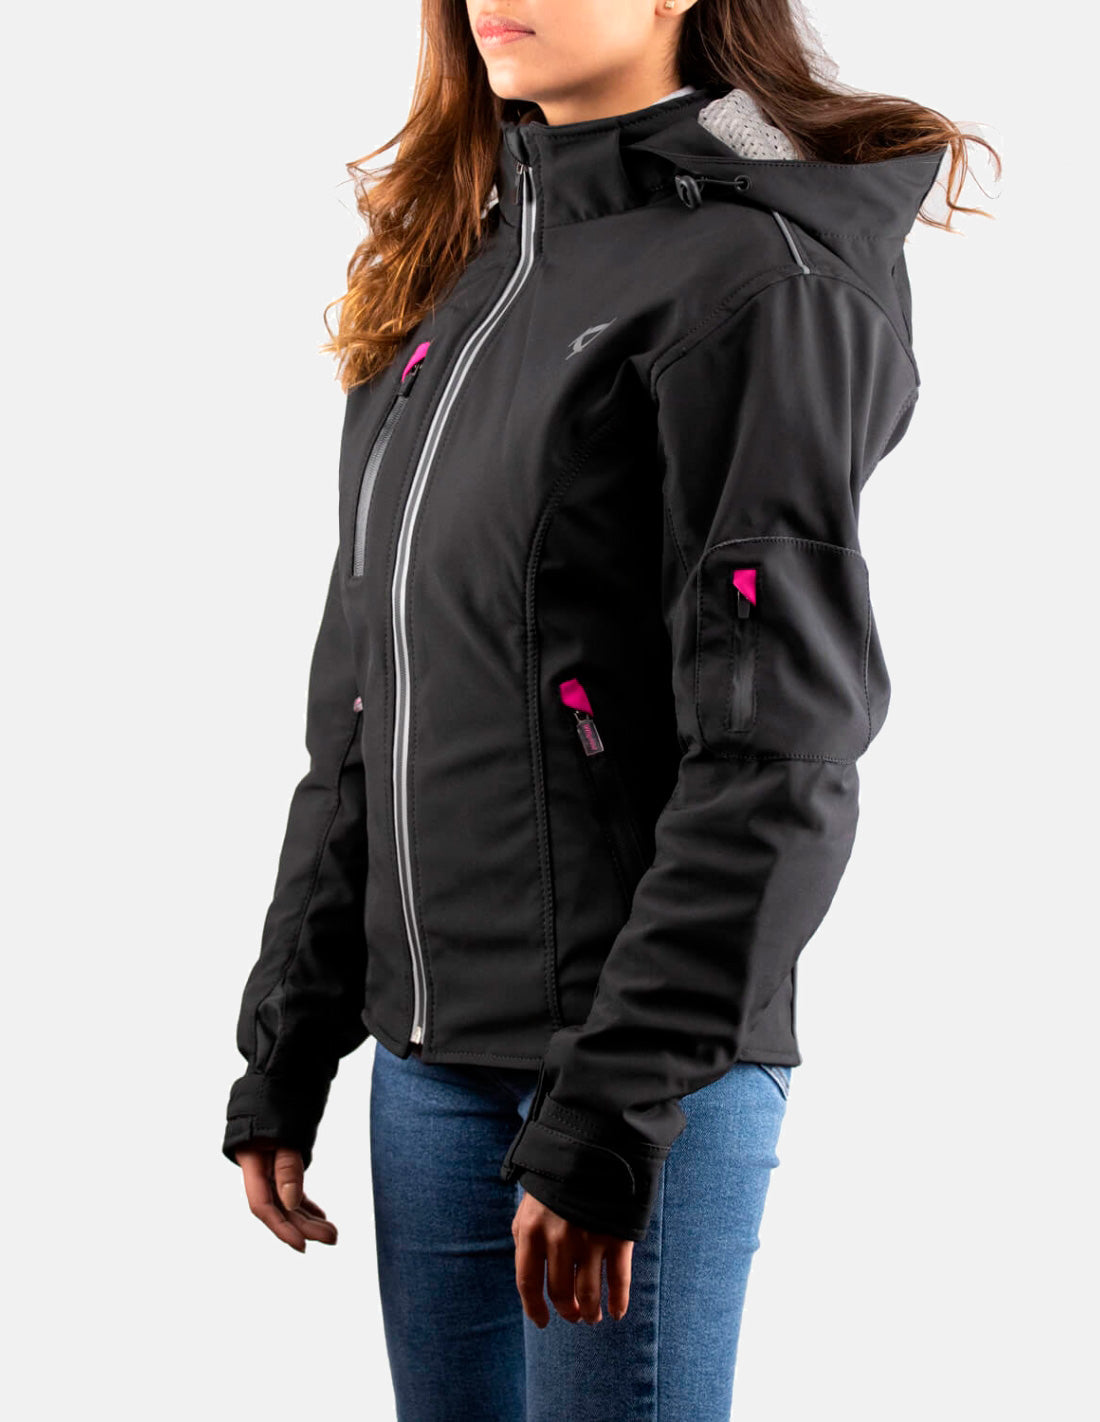 Softshell motorcycle jacket for women